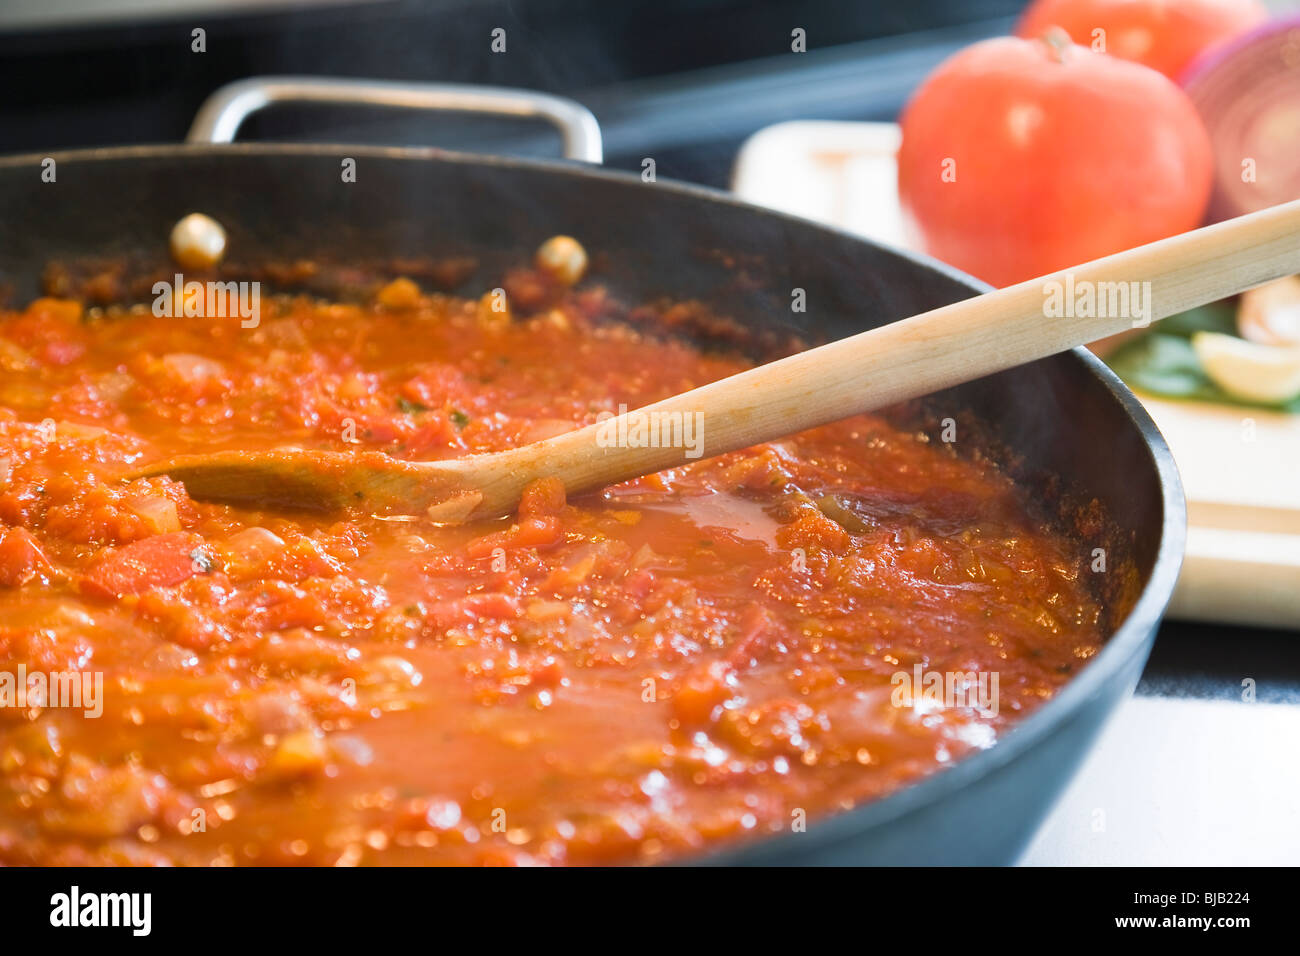 Preparation of tomato sauce on a pan in kitchen. Stock Photo